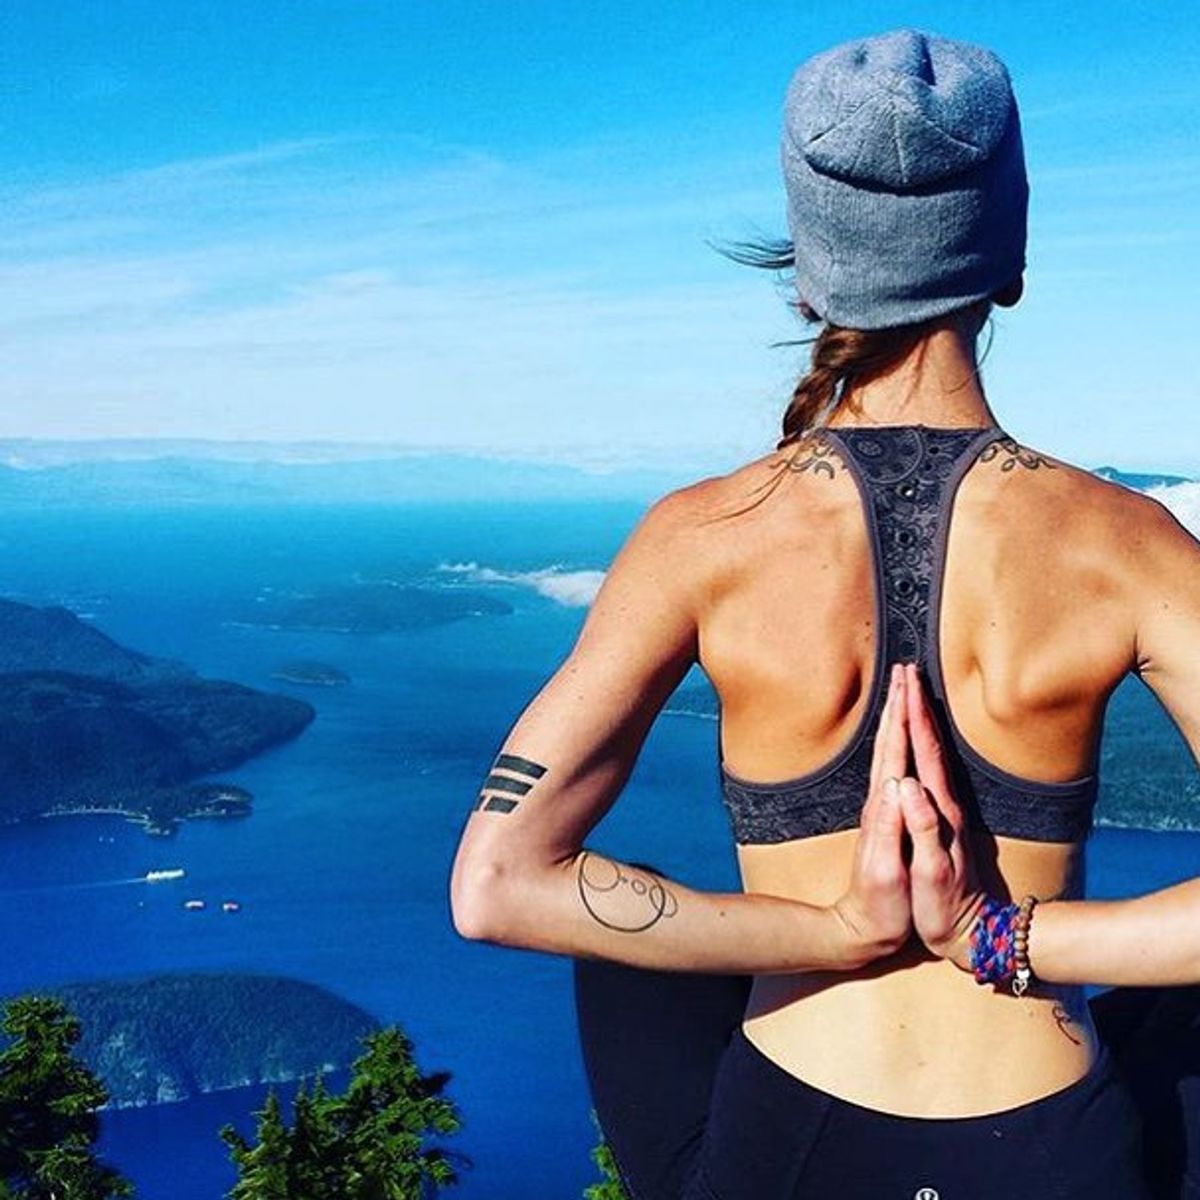 11 Thoughts That Go Through My Mind During Hot Yoga